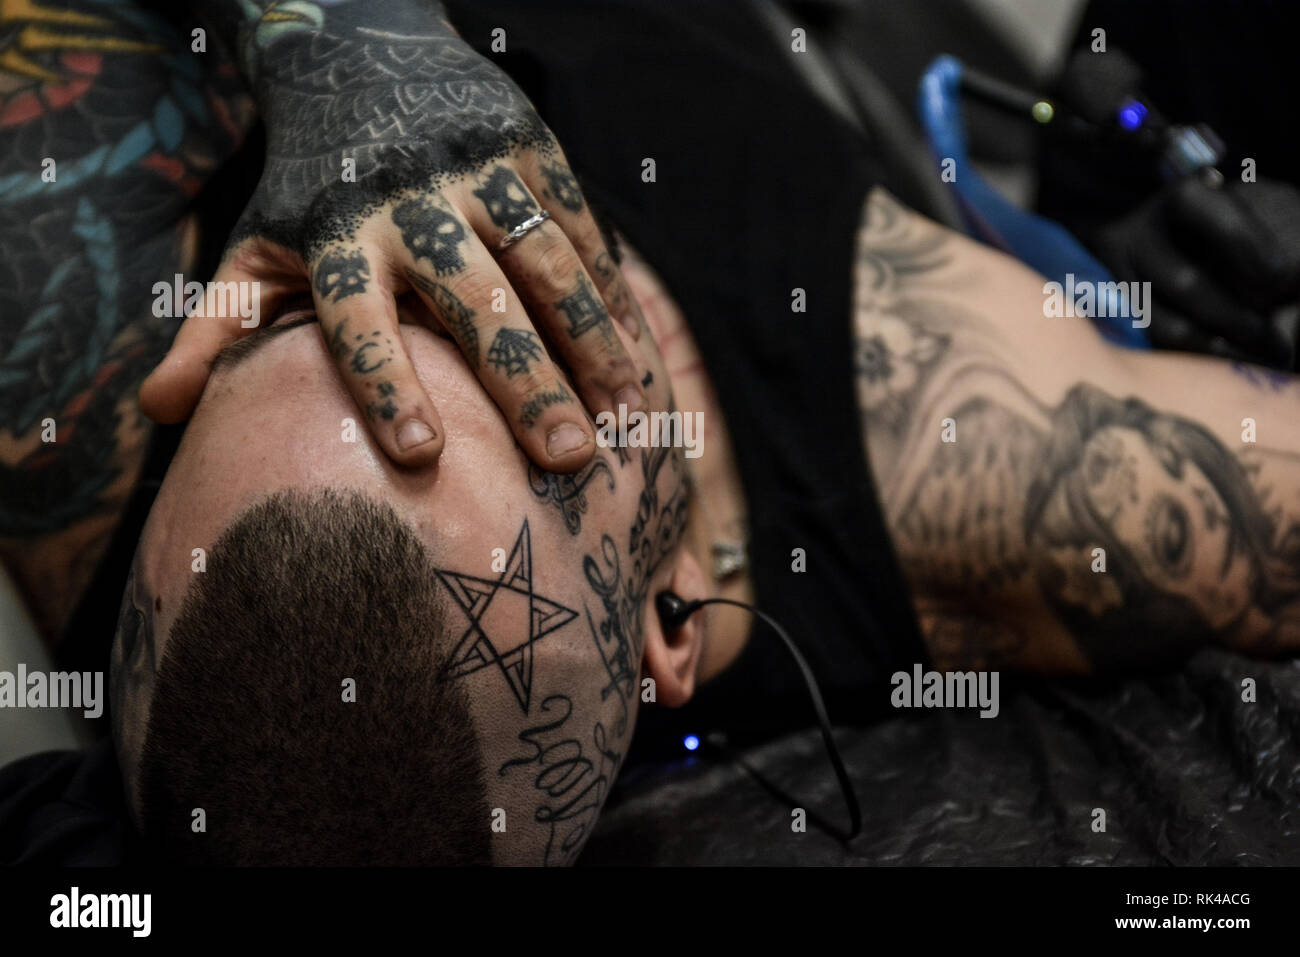 Milan Italy 08th Feb 19 Over 450 Of Internationally Renowned Artists Met In Milan To Tattoo On Site During Milan Tattoo Festival Held Yearly Since 1995 Credit Laura Chiesa Pacific Press Alamy Live News